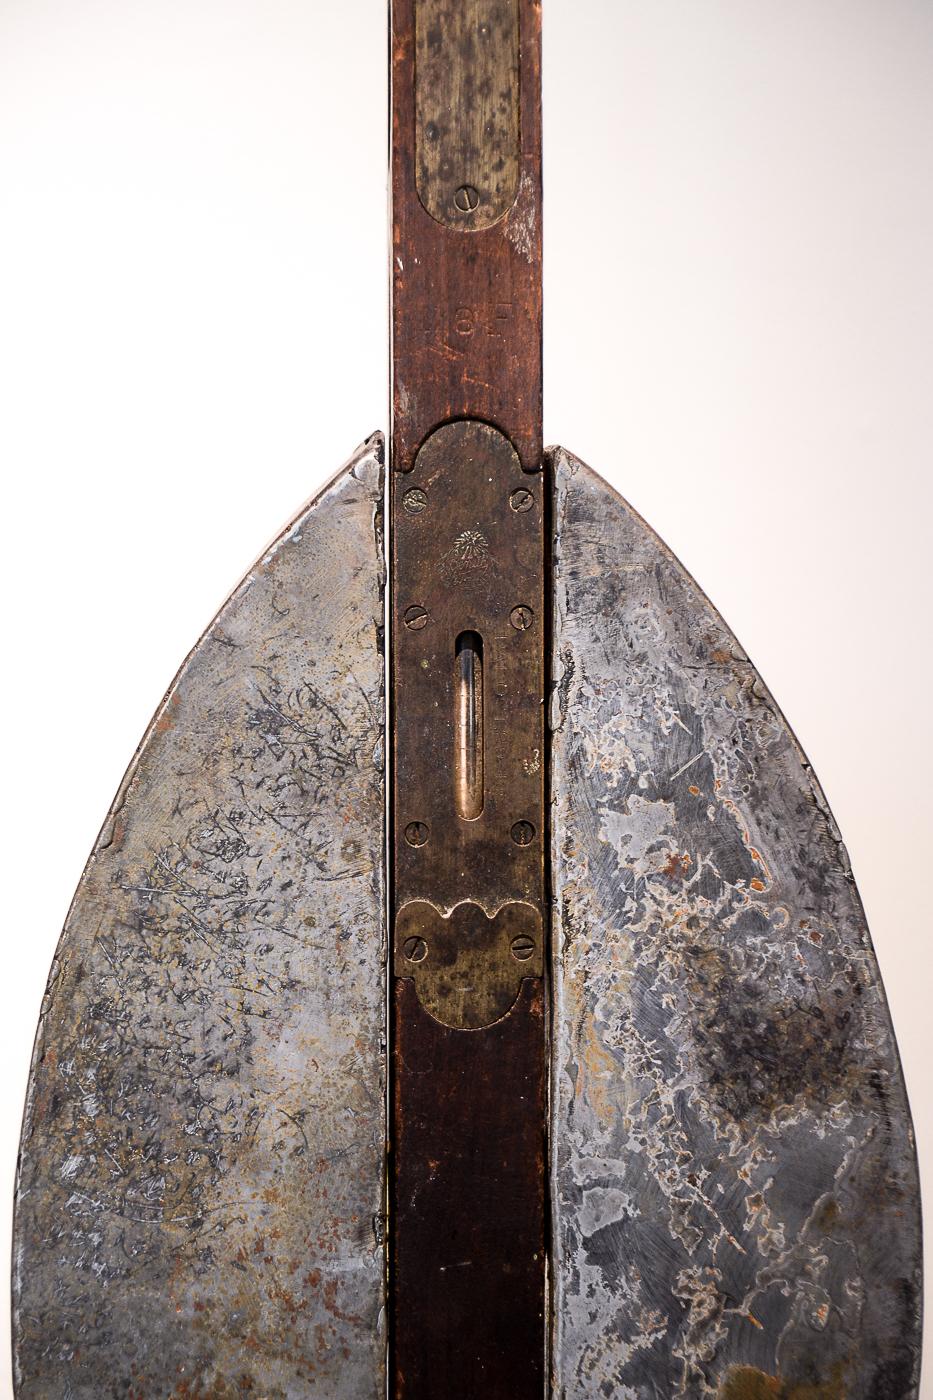 Bird I
wood, steel, carpenter’s level, bronze
12 x 8 x 31 in

Artist statement:

I seldom use stock material, but prefer distressed and rusted steel that has been scarred, bent, and made imperfect. In this state, the material becomes quite